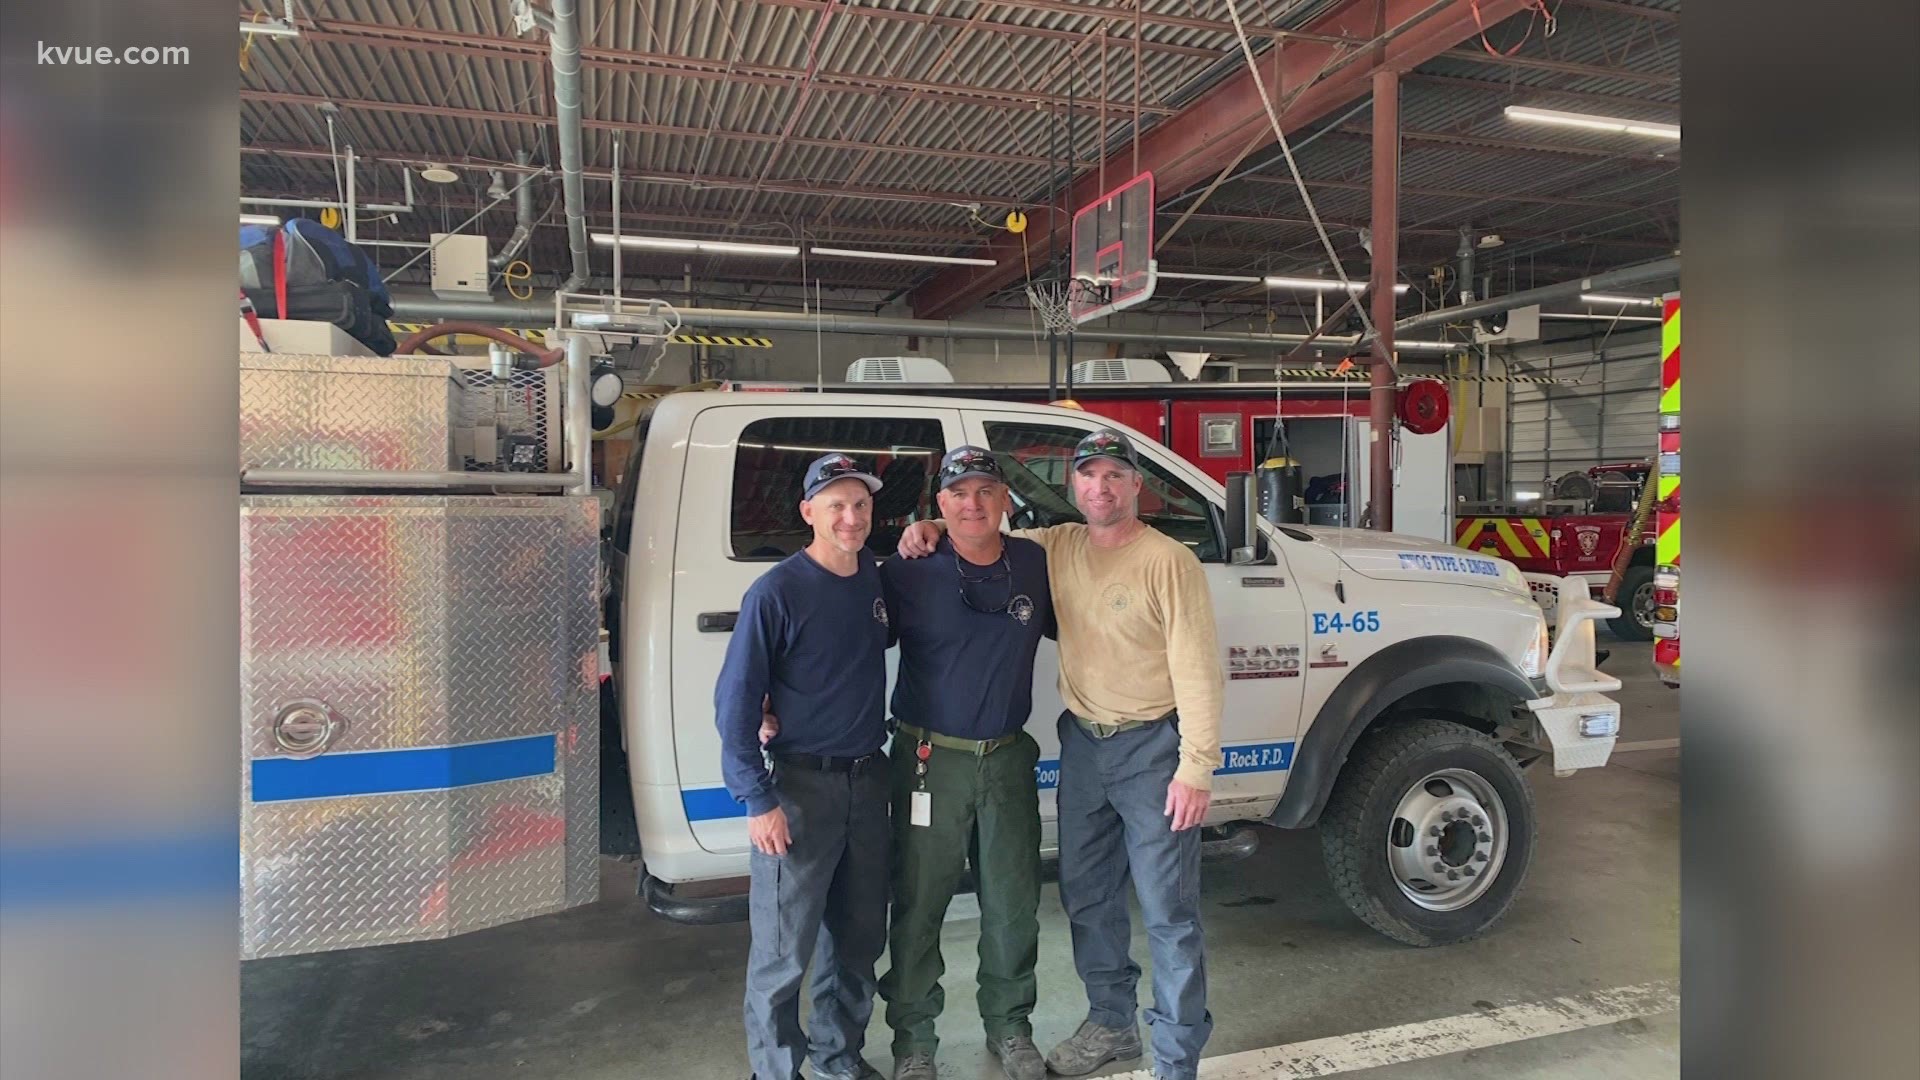 The trio from Round Rock left on Friday along with 200 firefighters from across Texas.